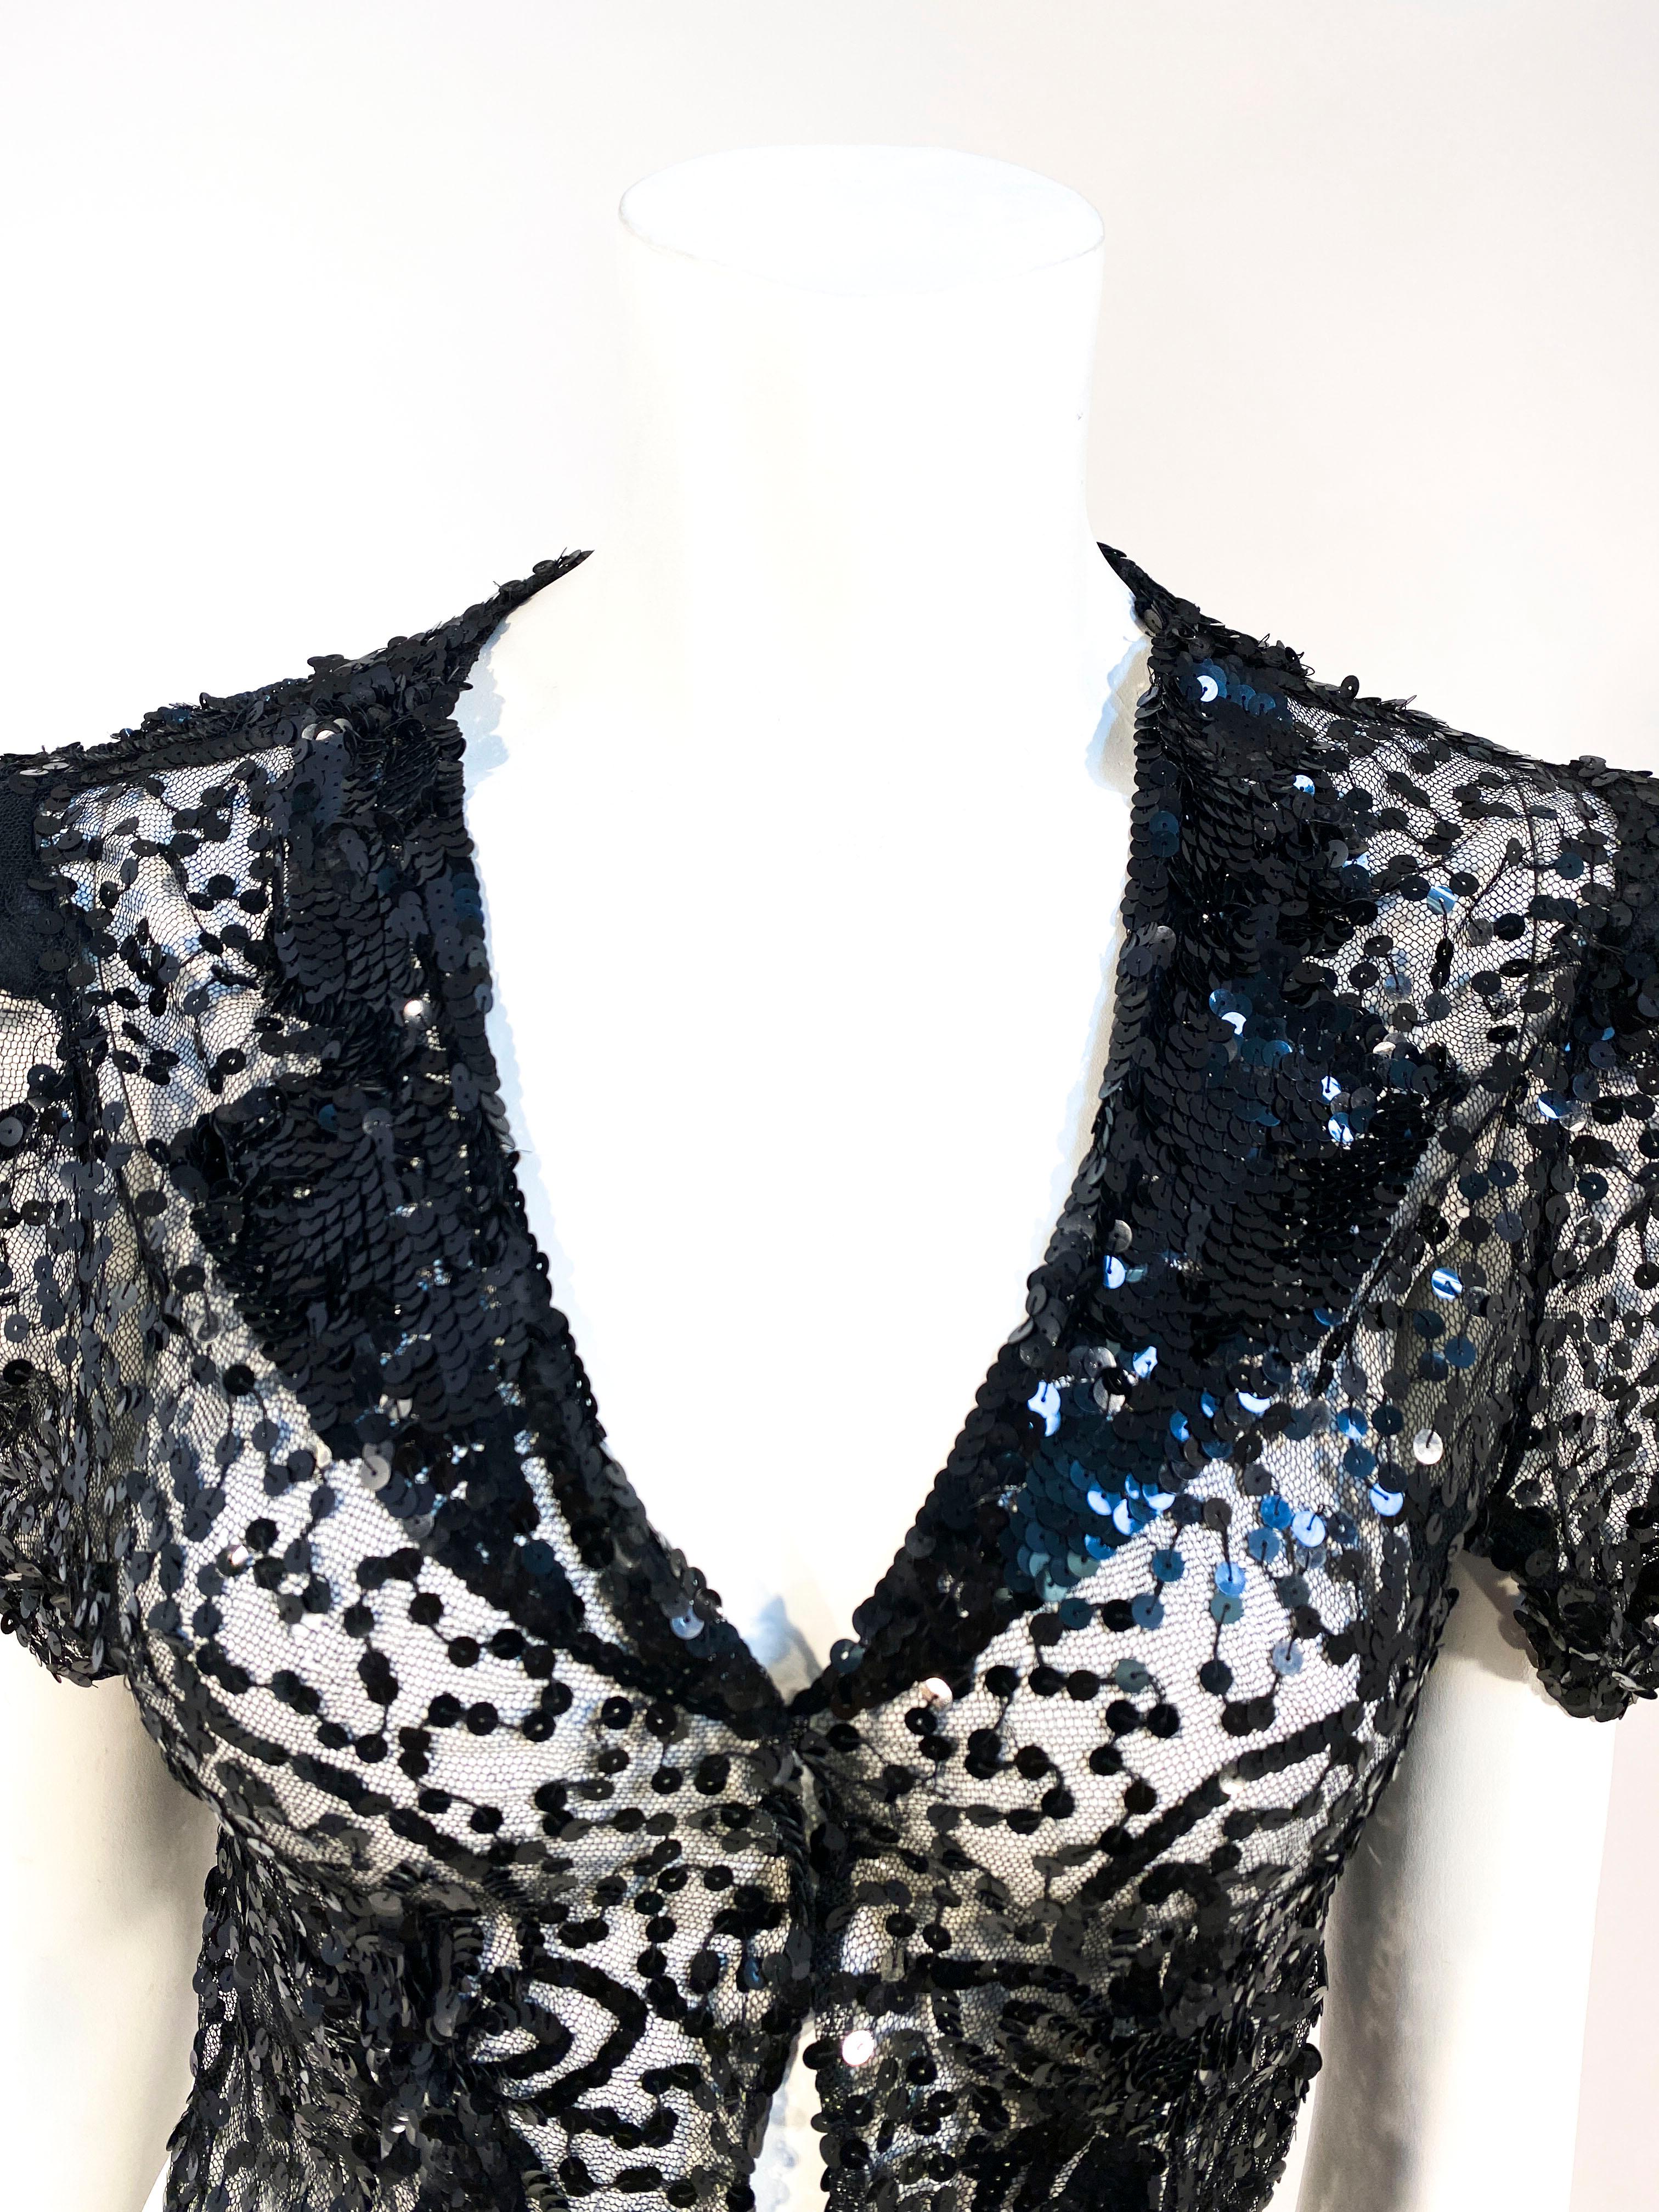 1930s black evening bolero decorated with black sequin in floral patters and an enlarged faux tux-like lapel. The shoulders are padded to creates a short but full sleeve. There is a hook and eye closure in the front but this piece could be worn open